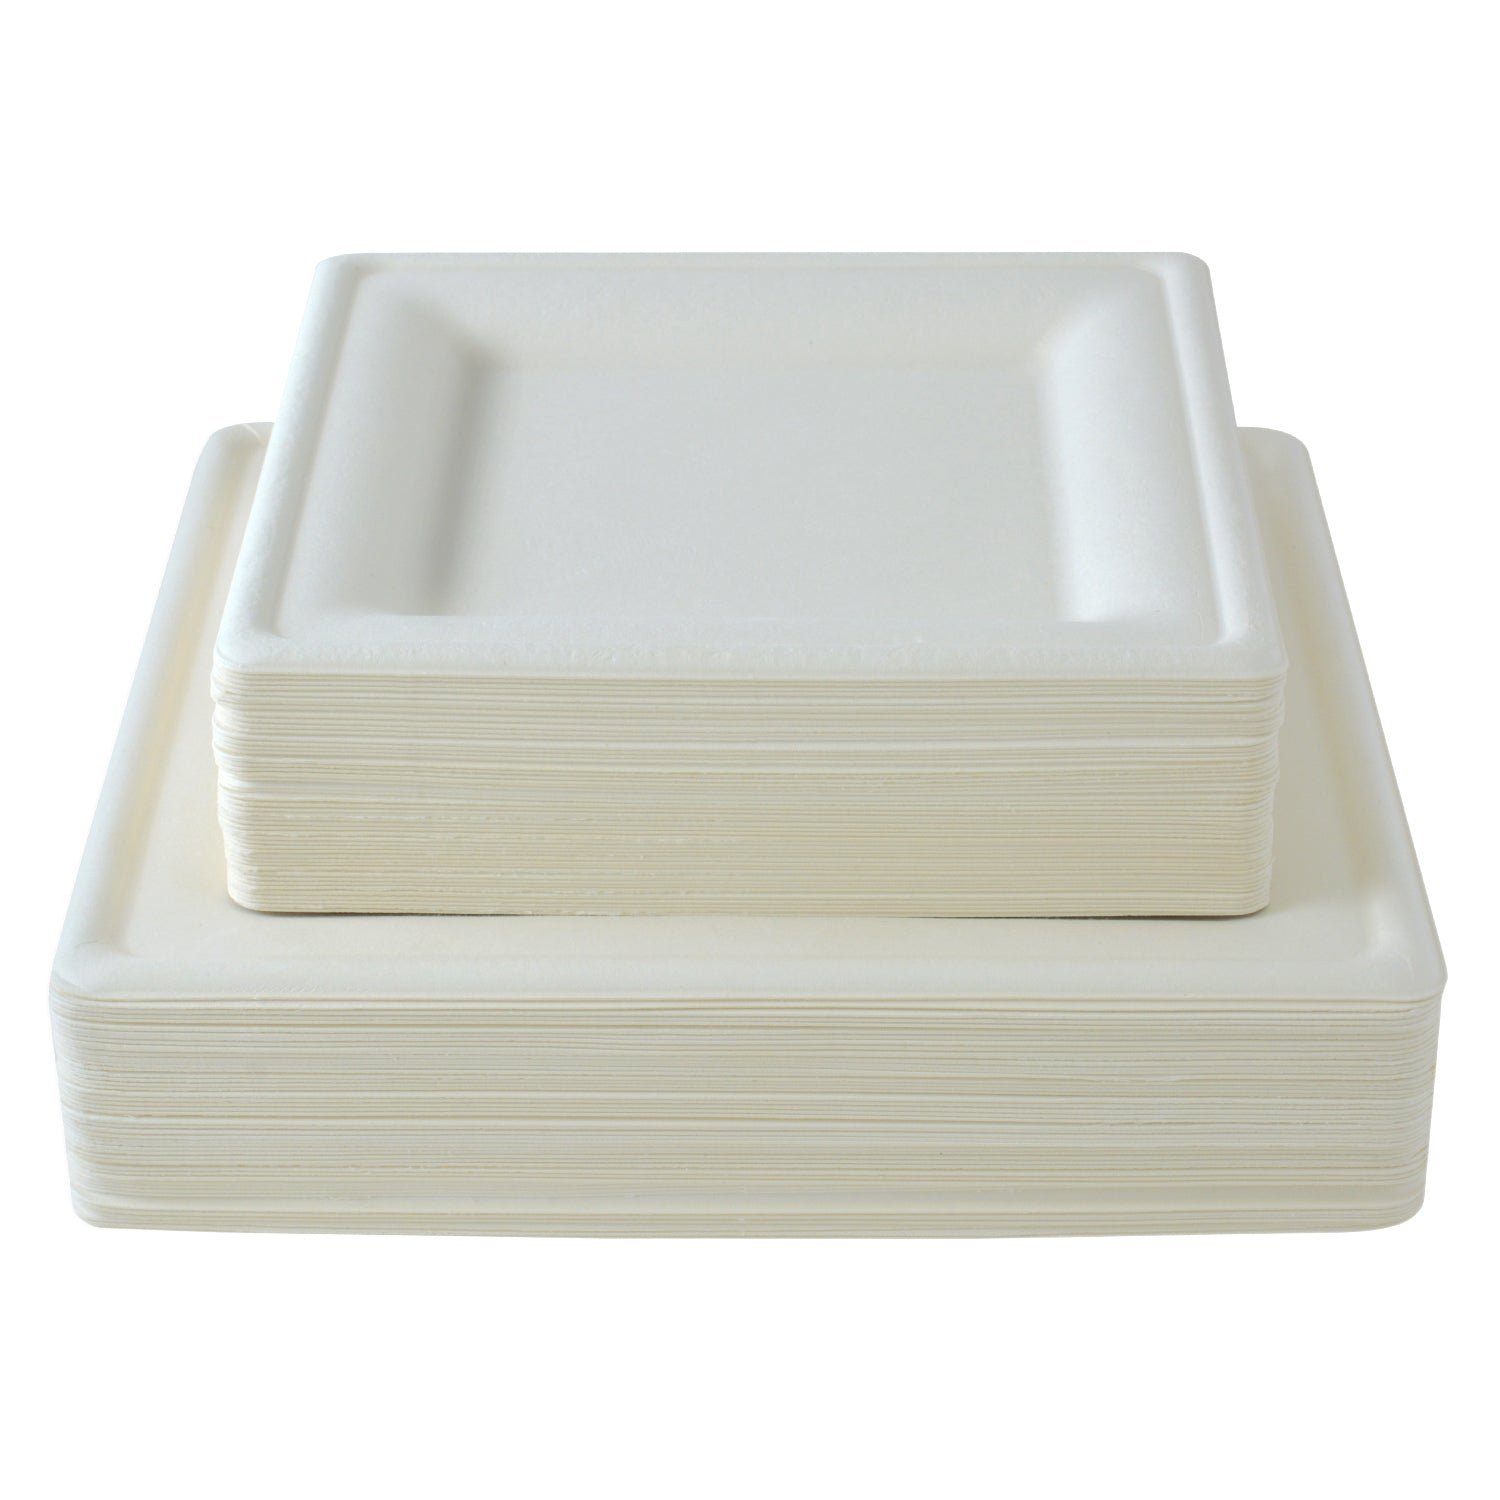 BGW103 Compostable Paper Plates 10.25 Biodegradable Paper Dinner